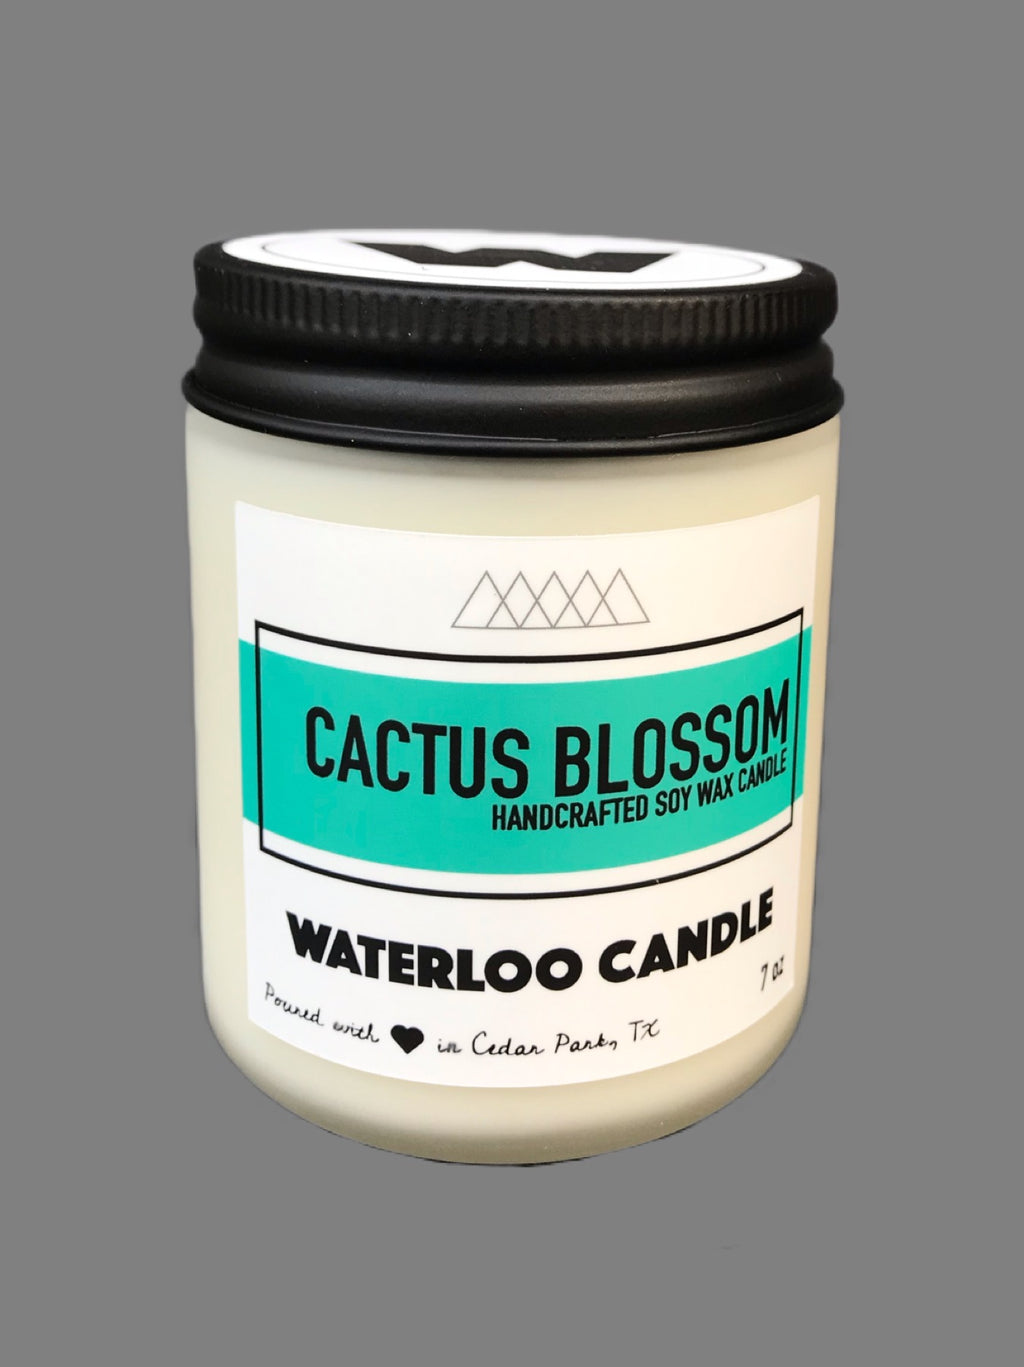 Cactus Blossom 7oz Soy Wax Candle